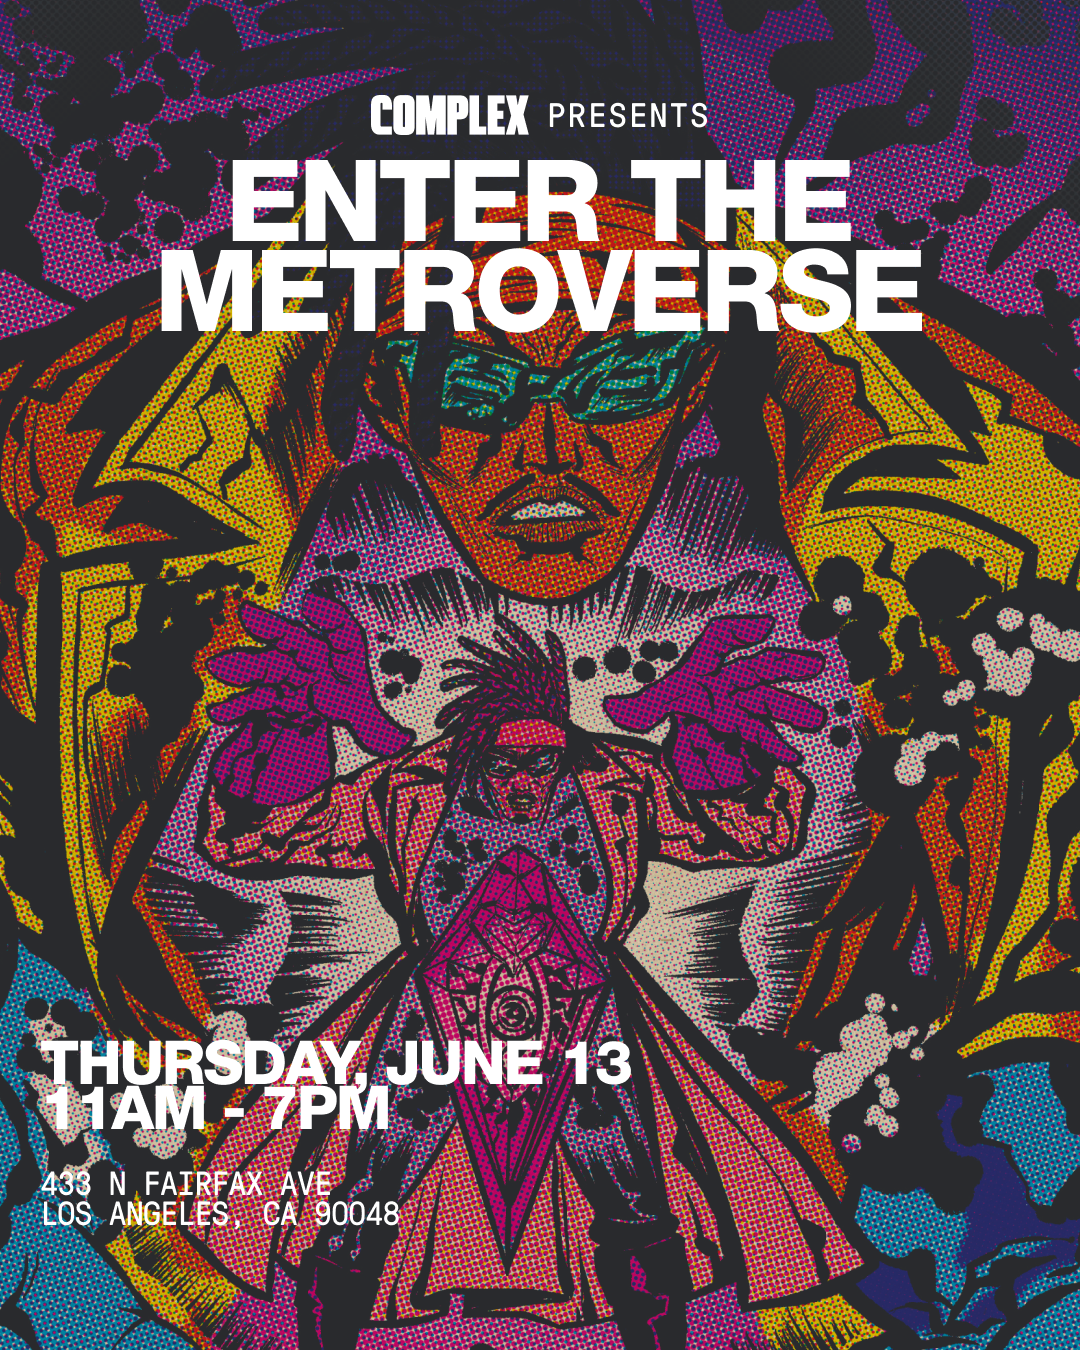 Poster for the event &quot;Enter The Metroverse,&quot; presented by Complex, occurring Thursday, June 13 from 11 AM to 7 PM at 433 N. Fairfax Ave, Los Angeles, CA 90048